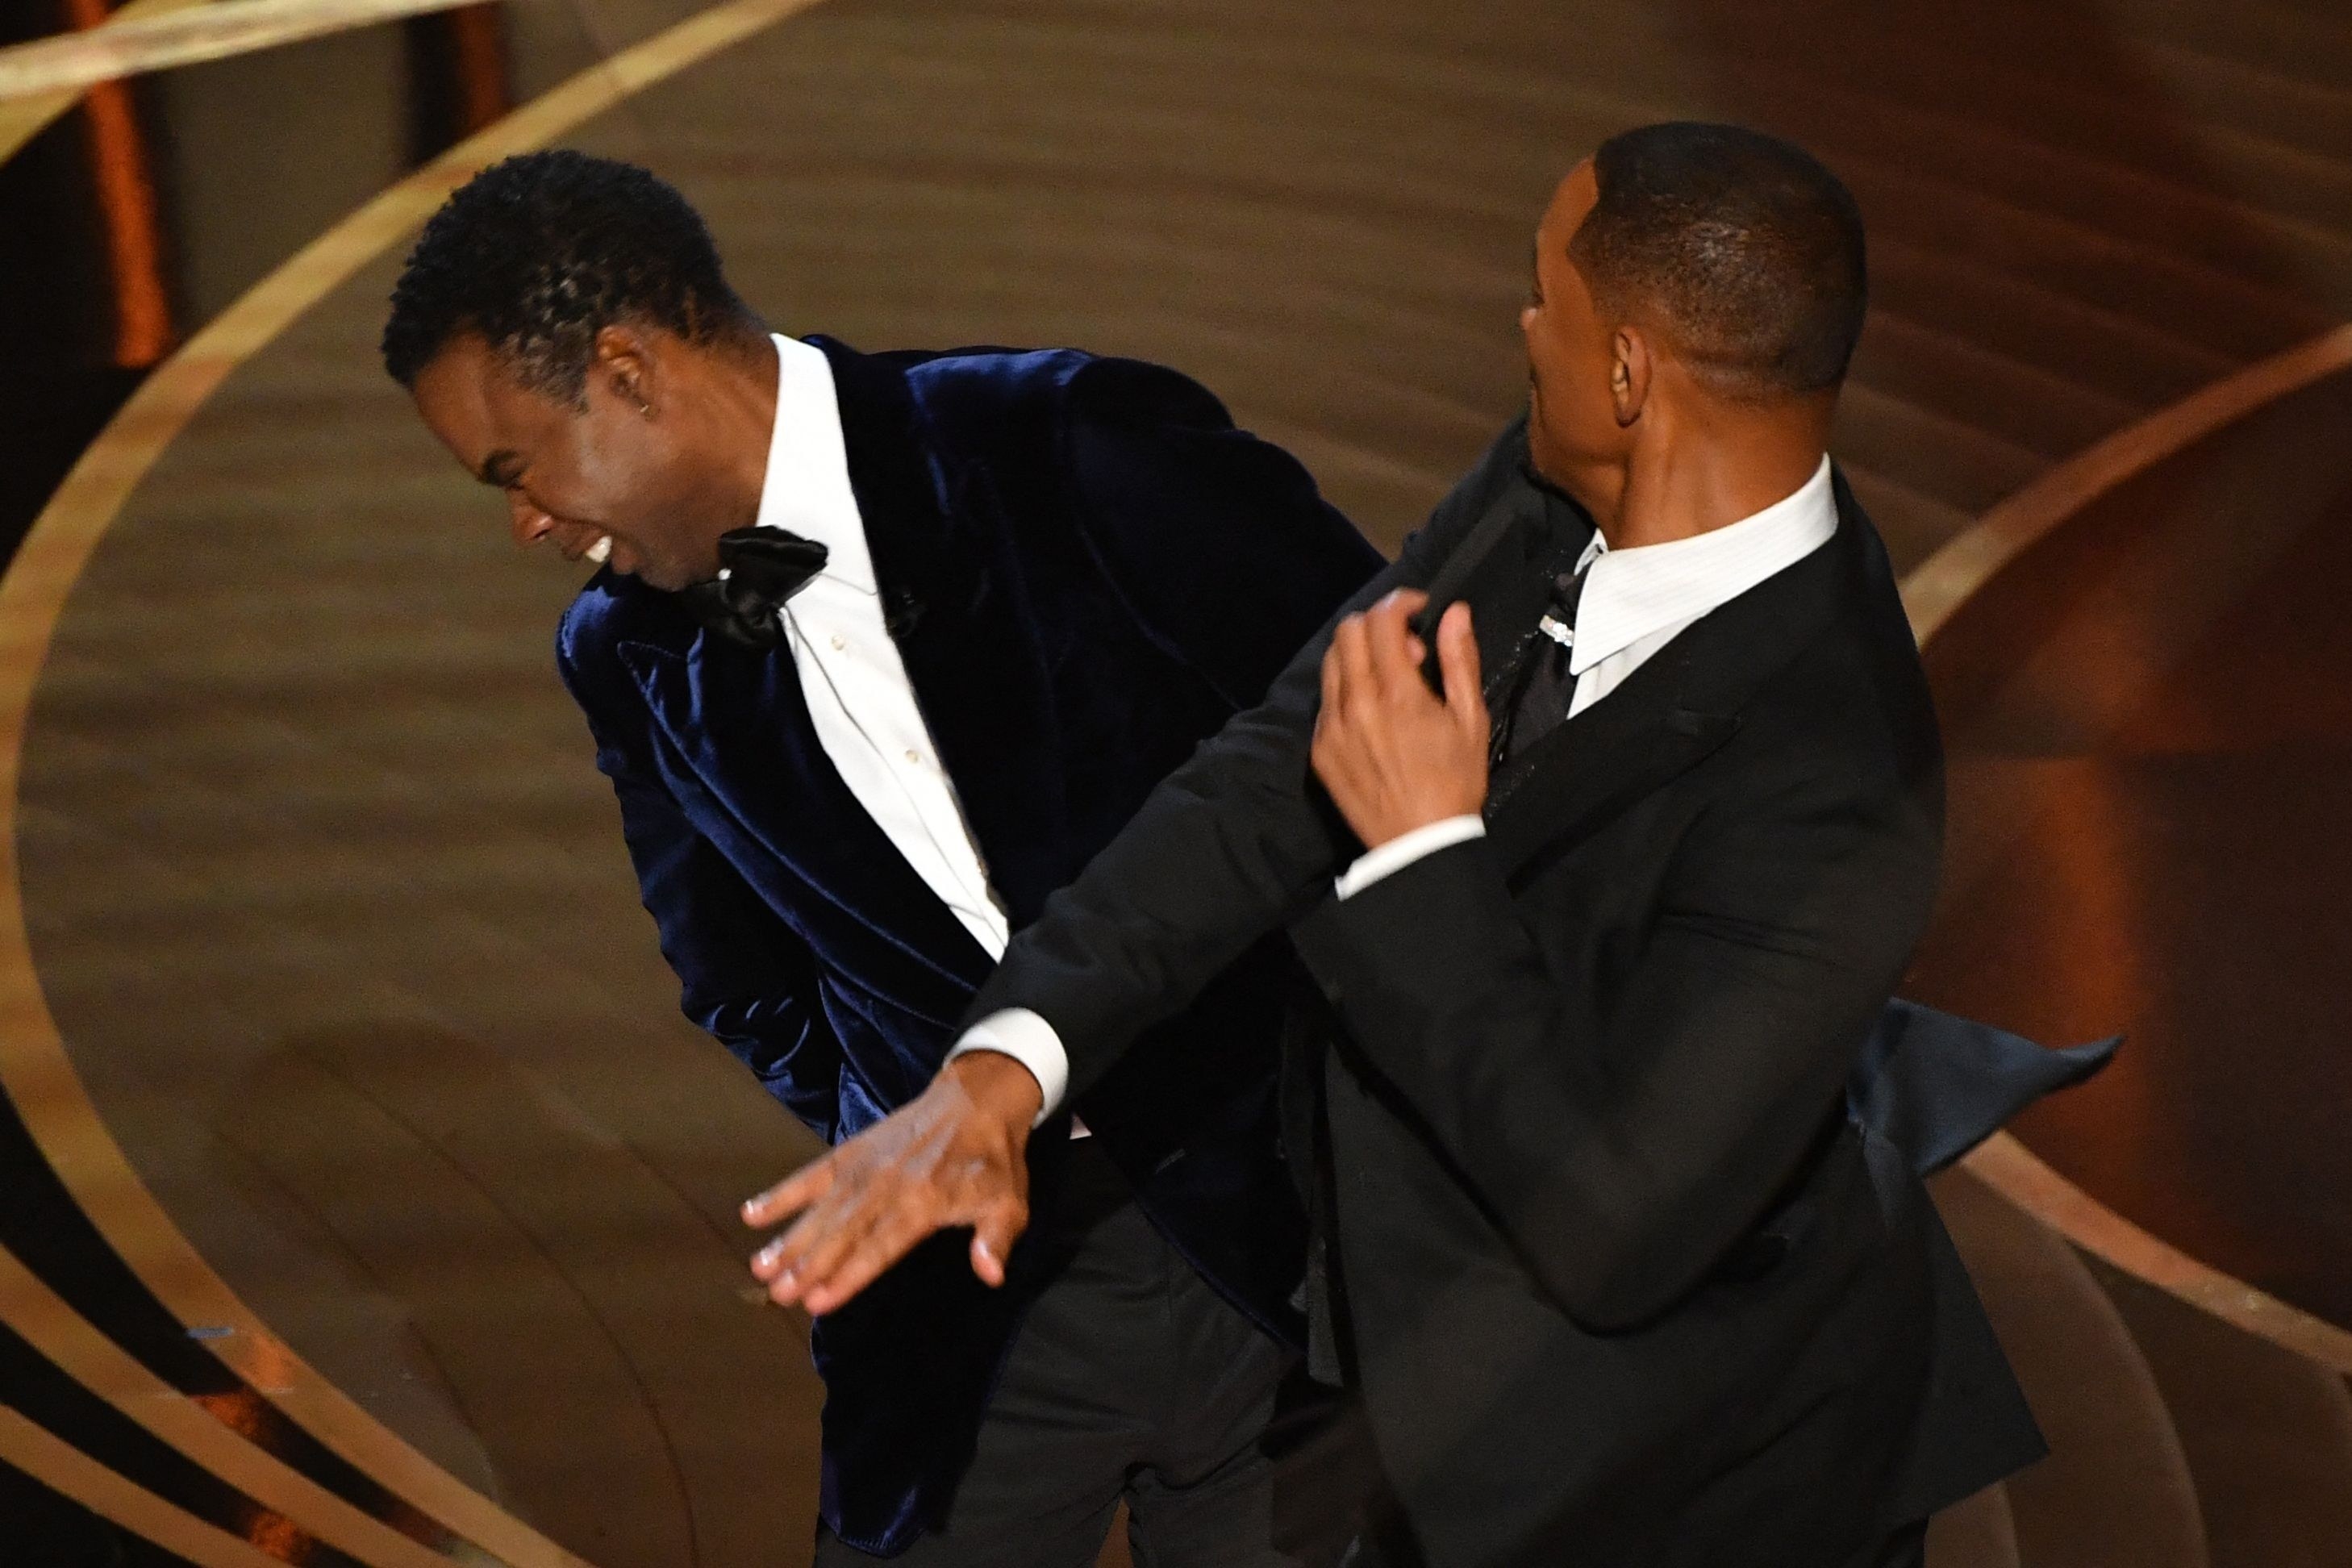 Will slapping Chris onstage at the Oscars